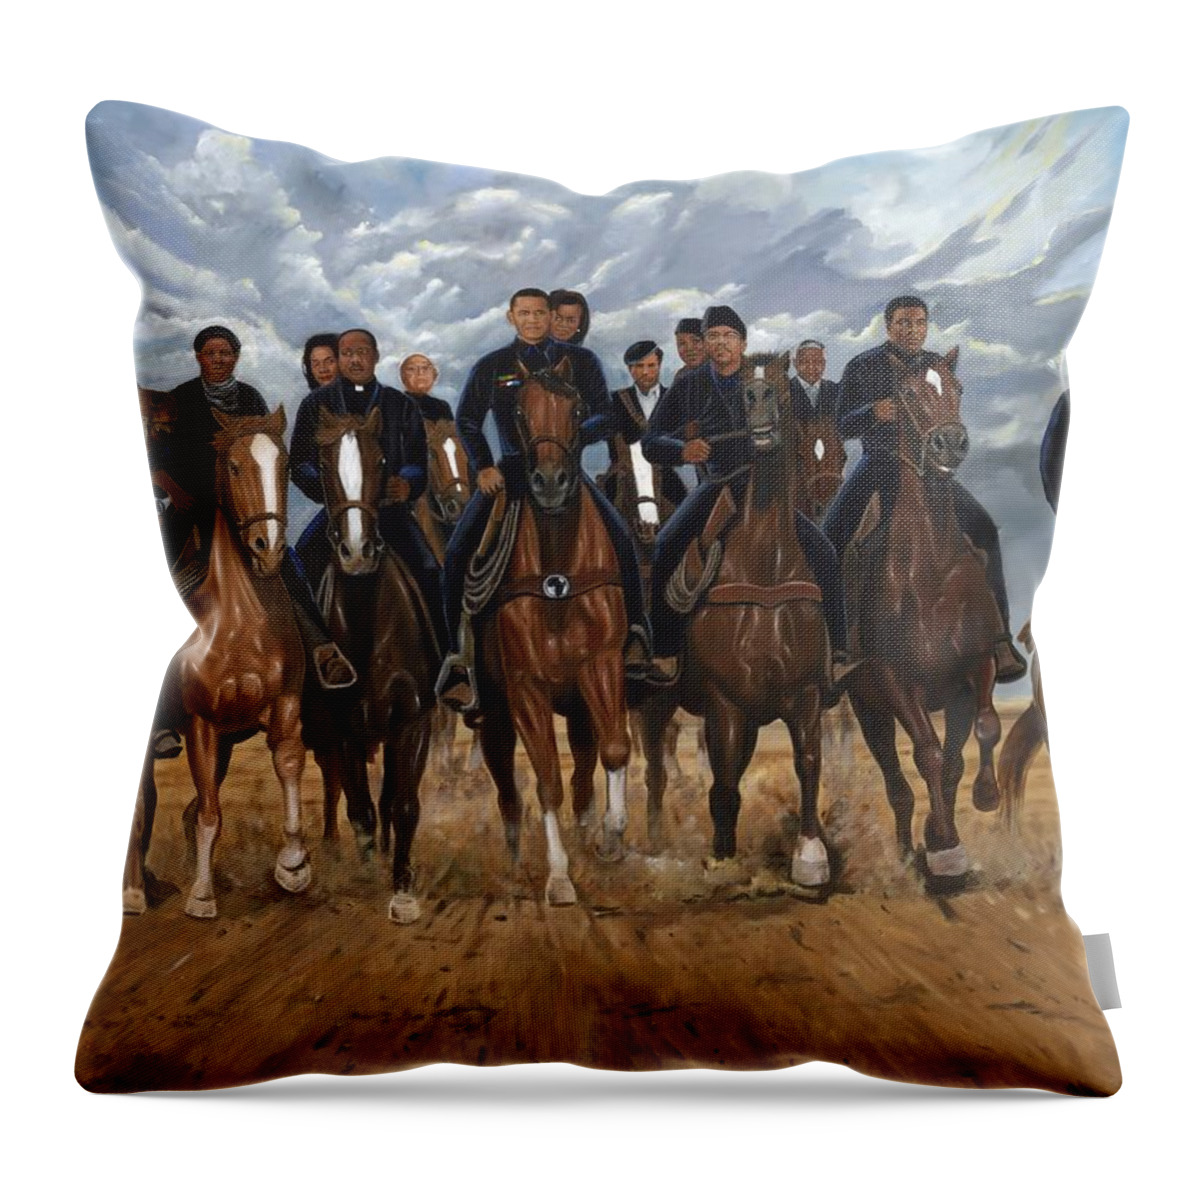 Horse Throw Pillow featuring the painting Freedom Riders by Kolongi TheArtist